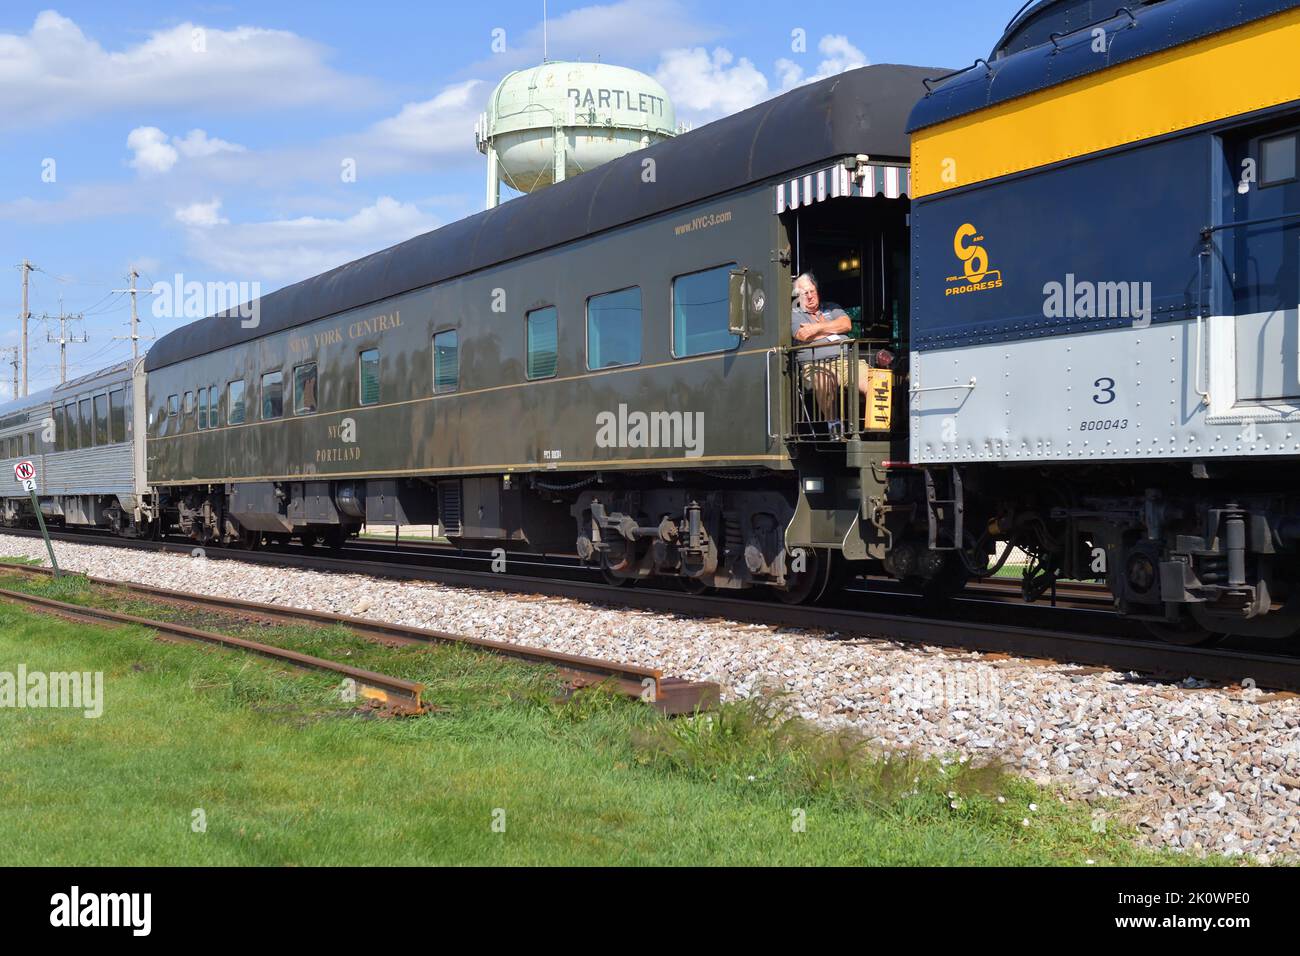 Bartlett, Illinois, USA. Man appears to be sleeping while sitting on a platform of one of the passenger cars making up the AAPRCO special train. Stock Photo